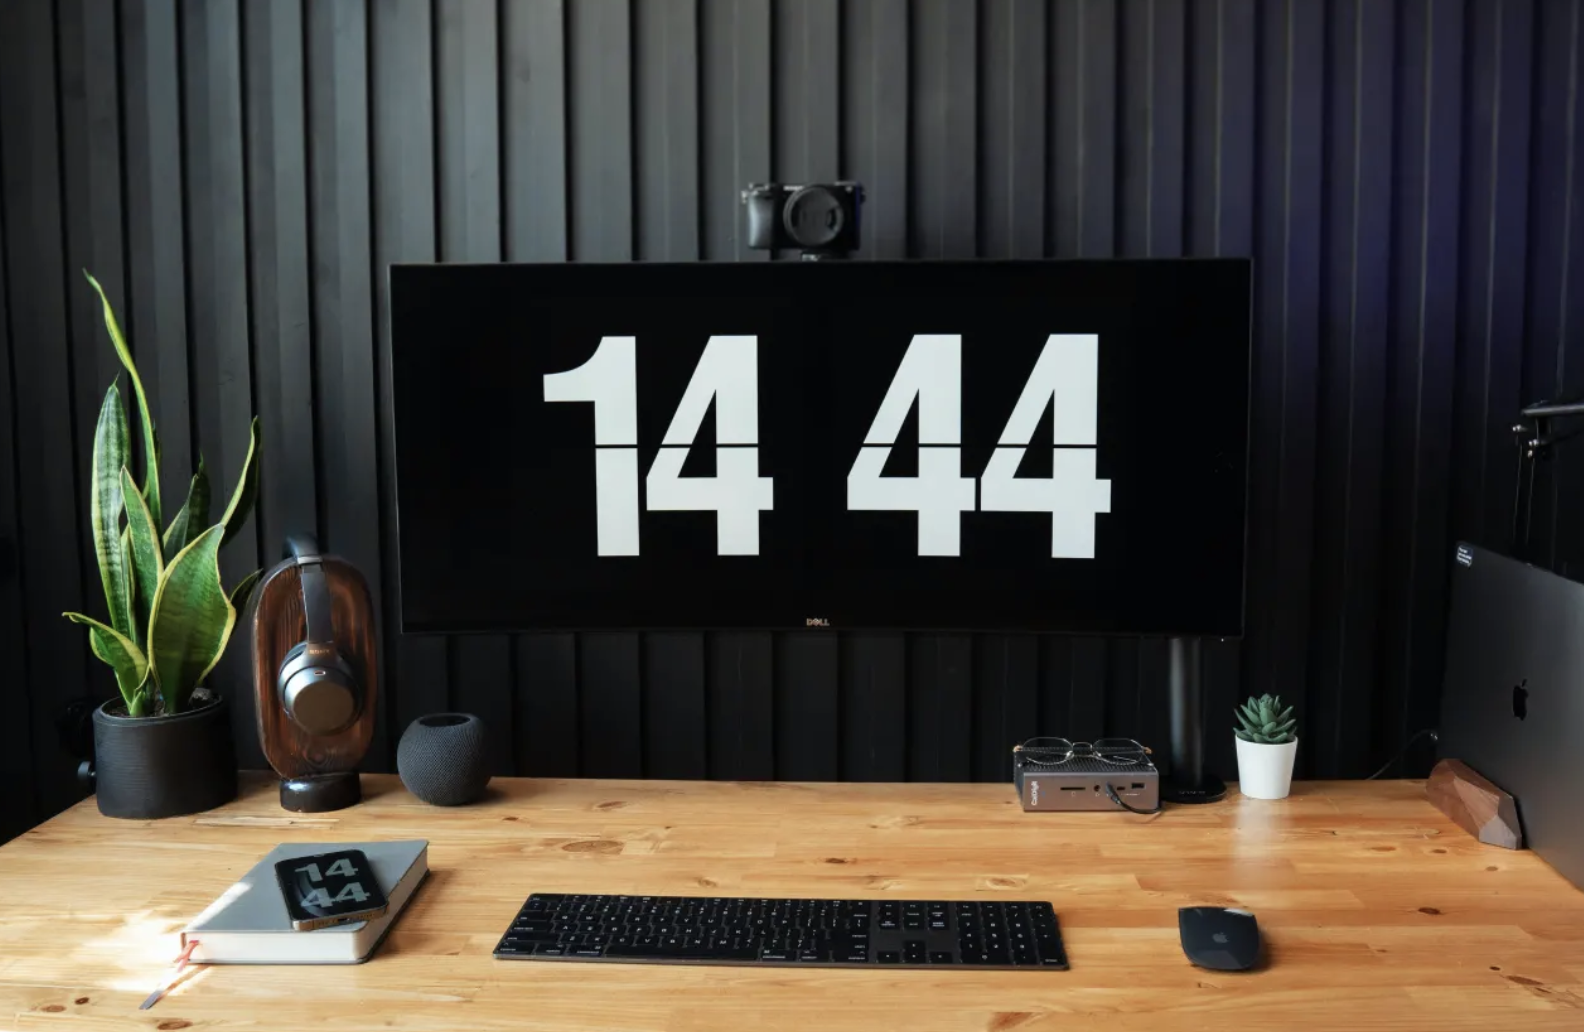 A nicely designed desk with a big monitor showing a clock.